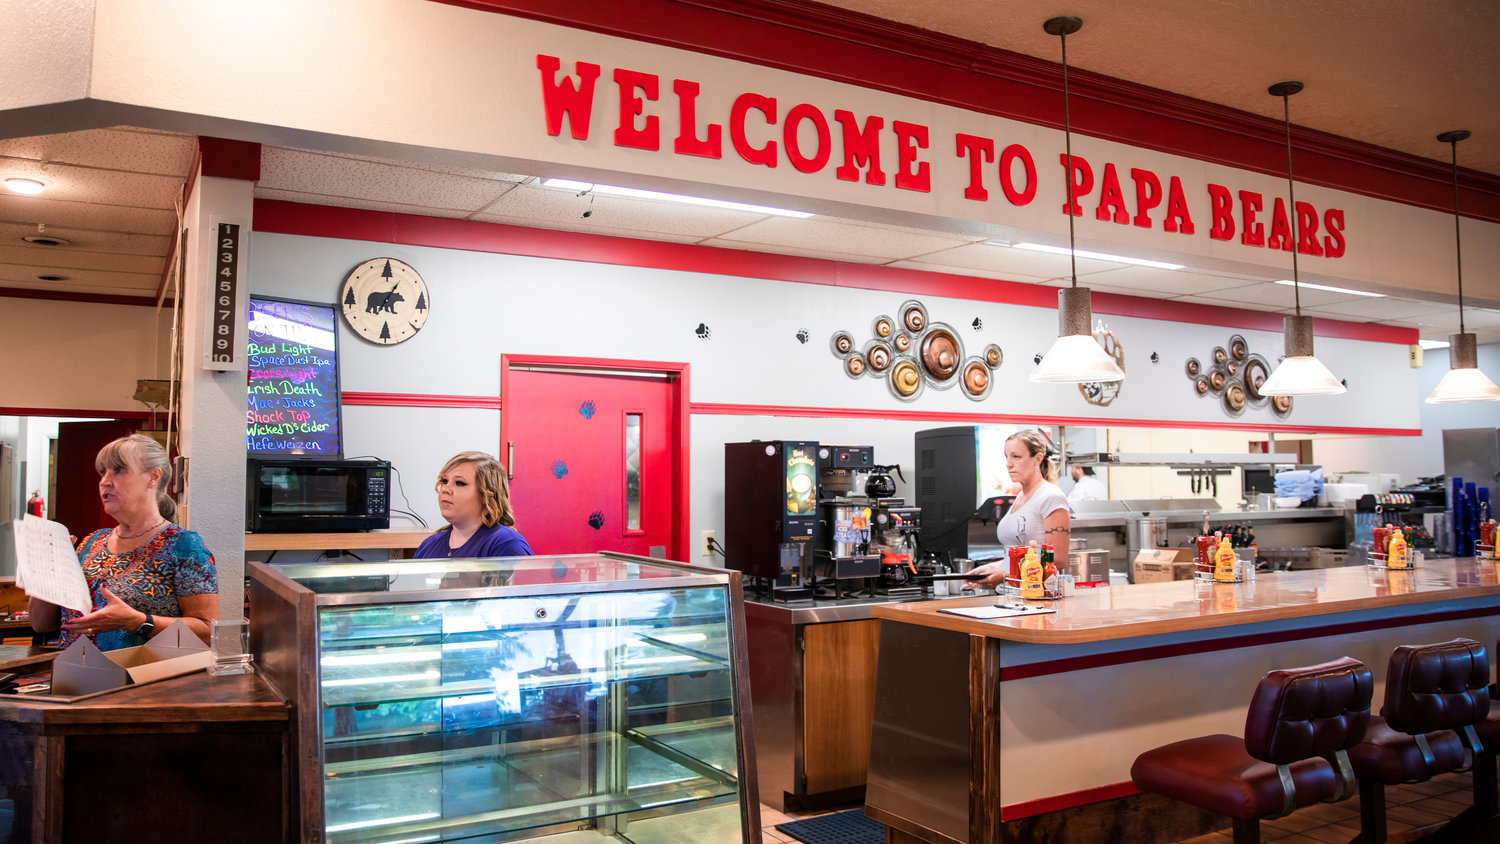 A wall sign reads “Welcome to Papa Bears” on opening day.